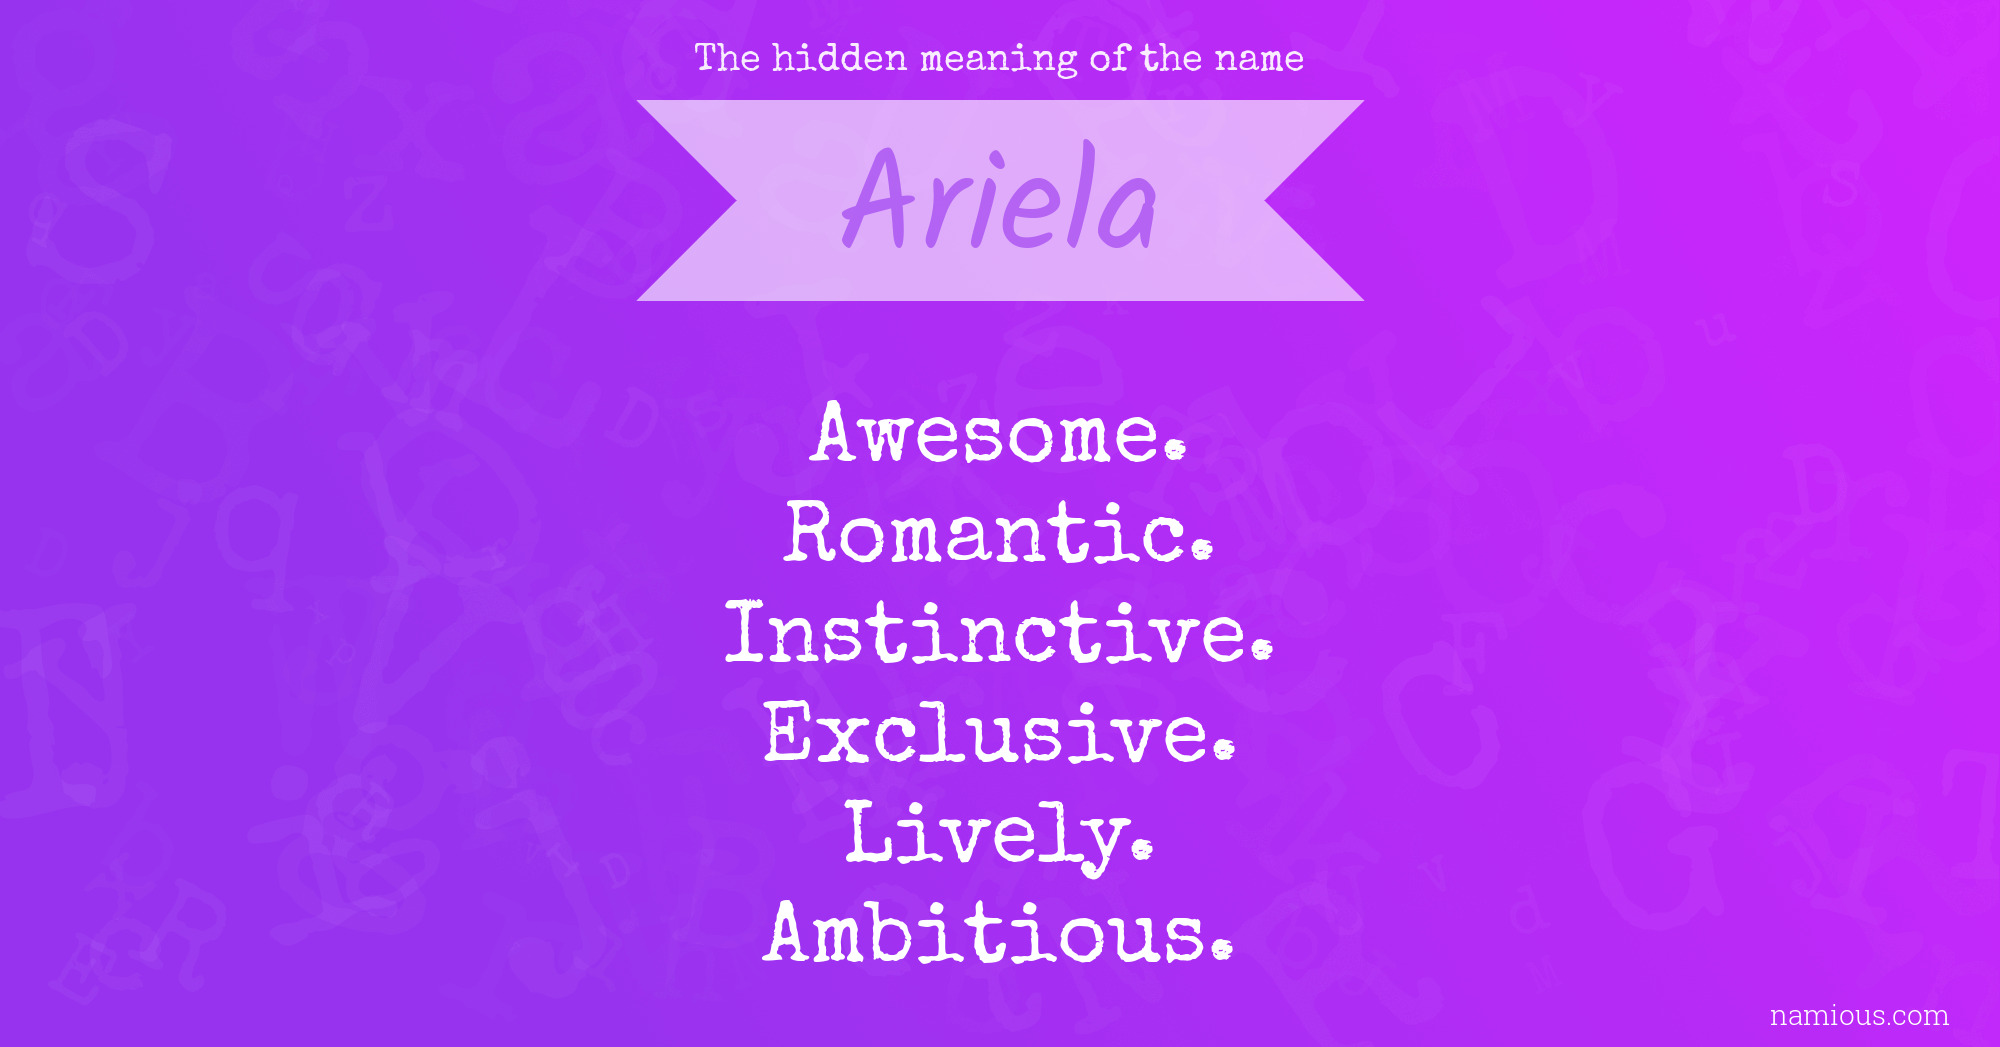 The hidden meaning of the name Ariela